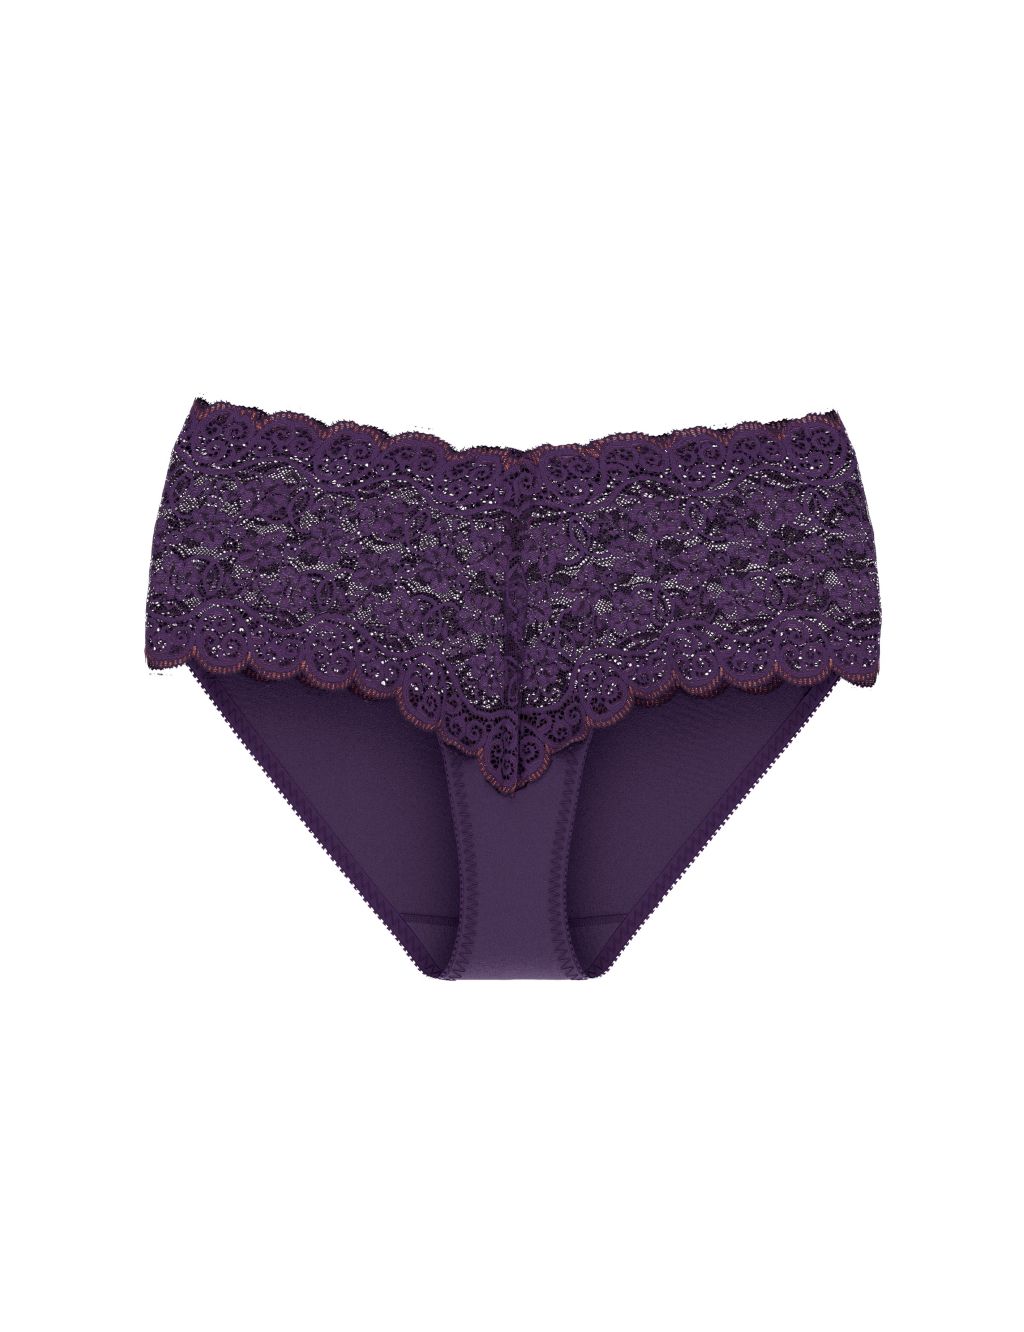 Amourette 300 All Over Lace Full Briefs image 1